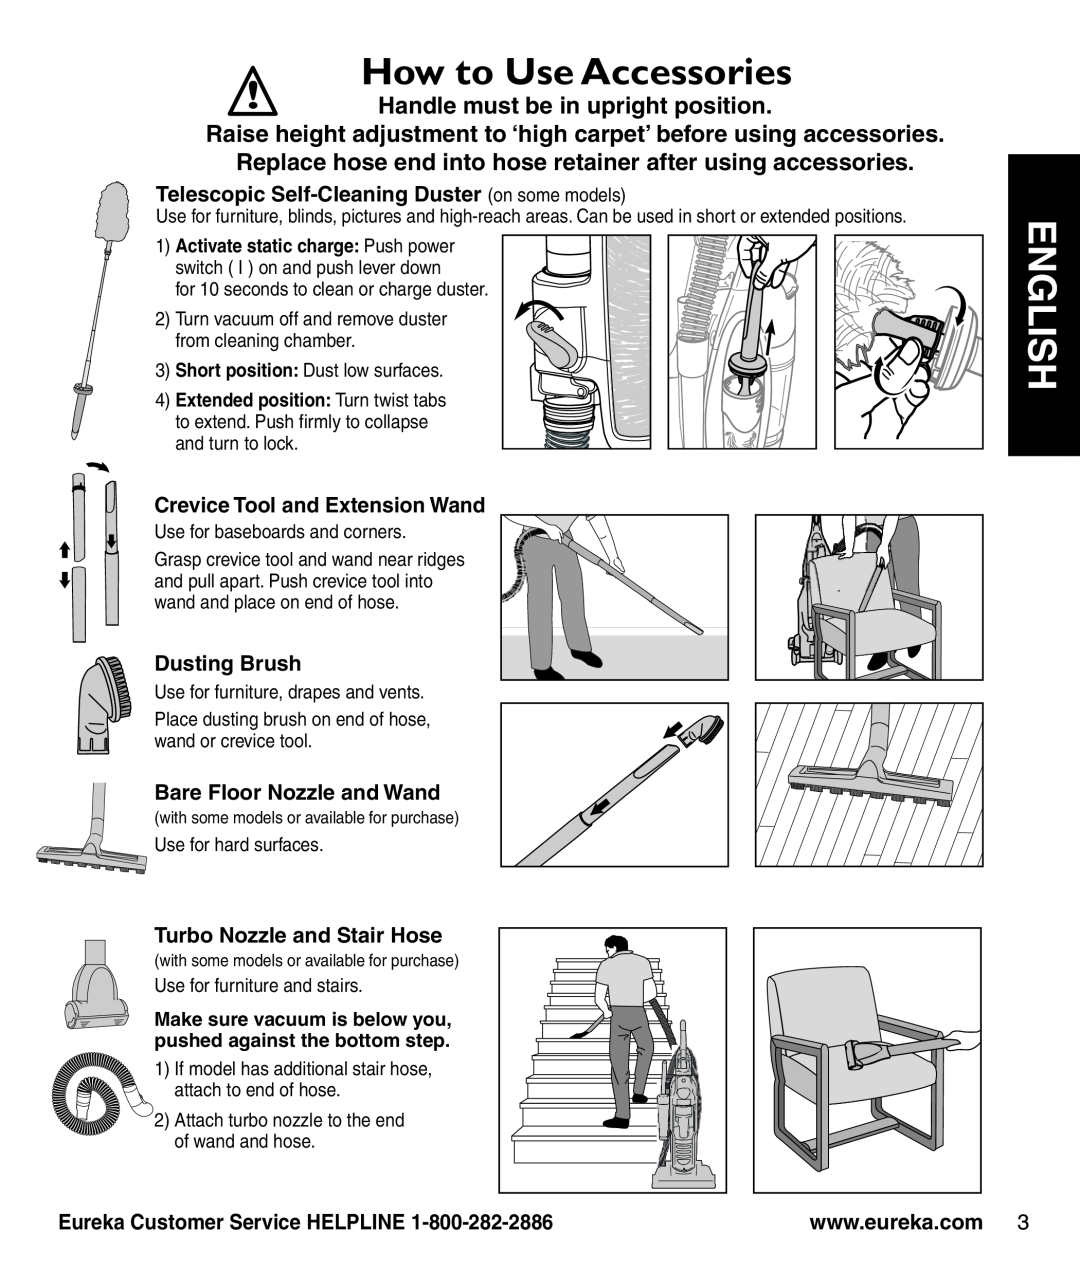 Eureka 3280 manual How to Use Accessories, Raise height adjustment to ‘high carpet’ before using accessories, Dusting Brush 